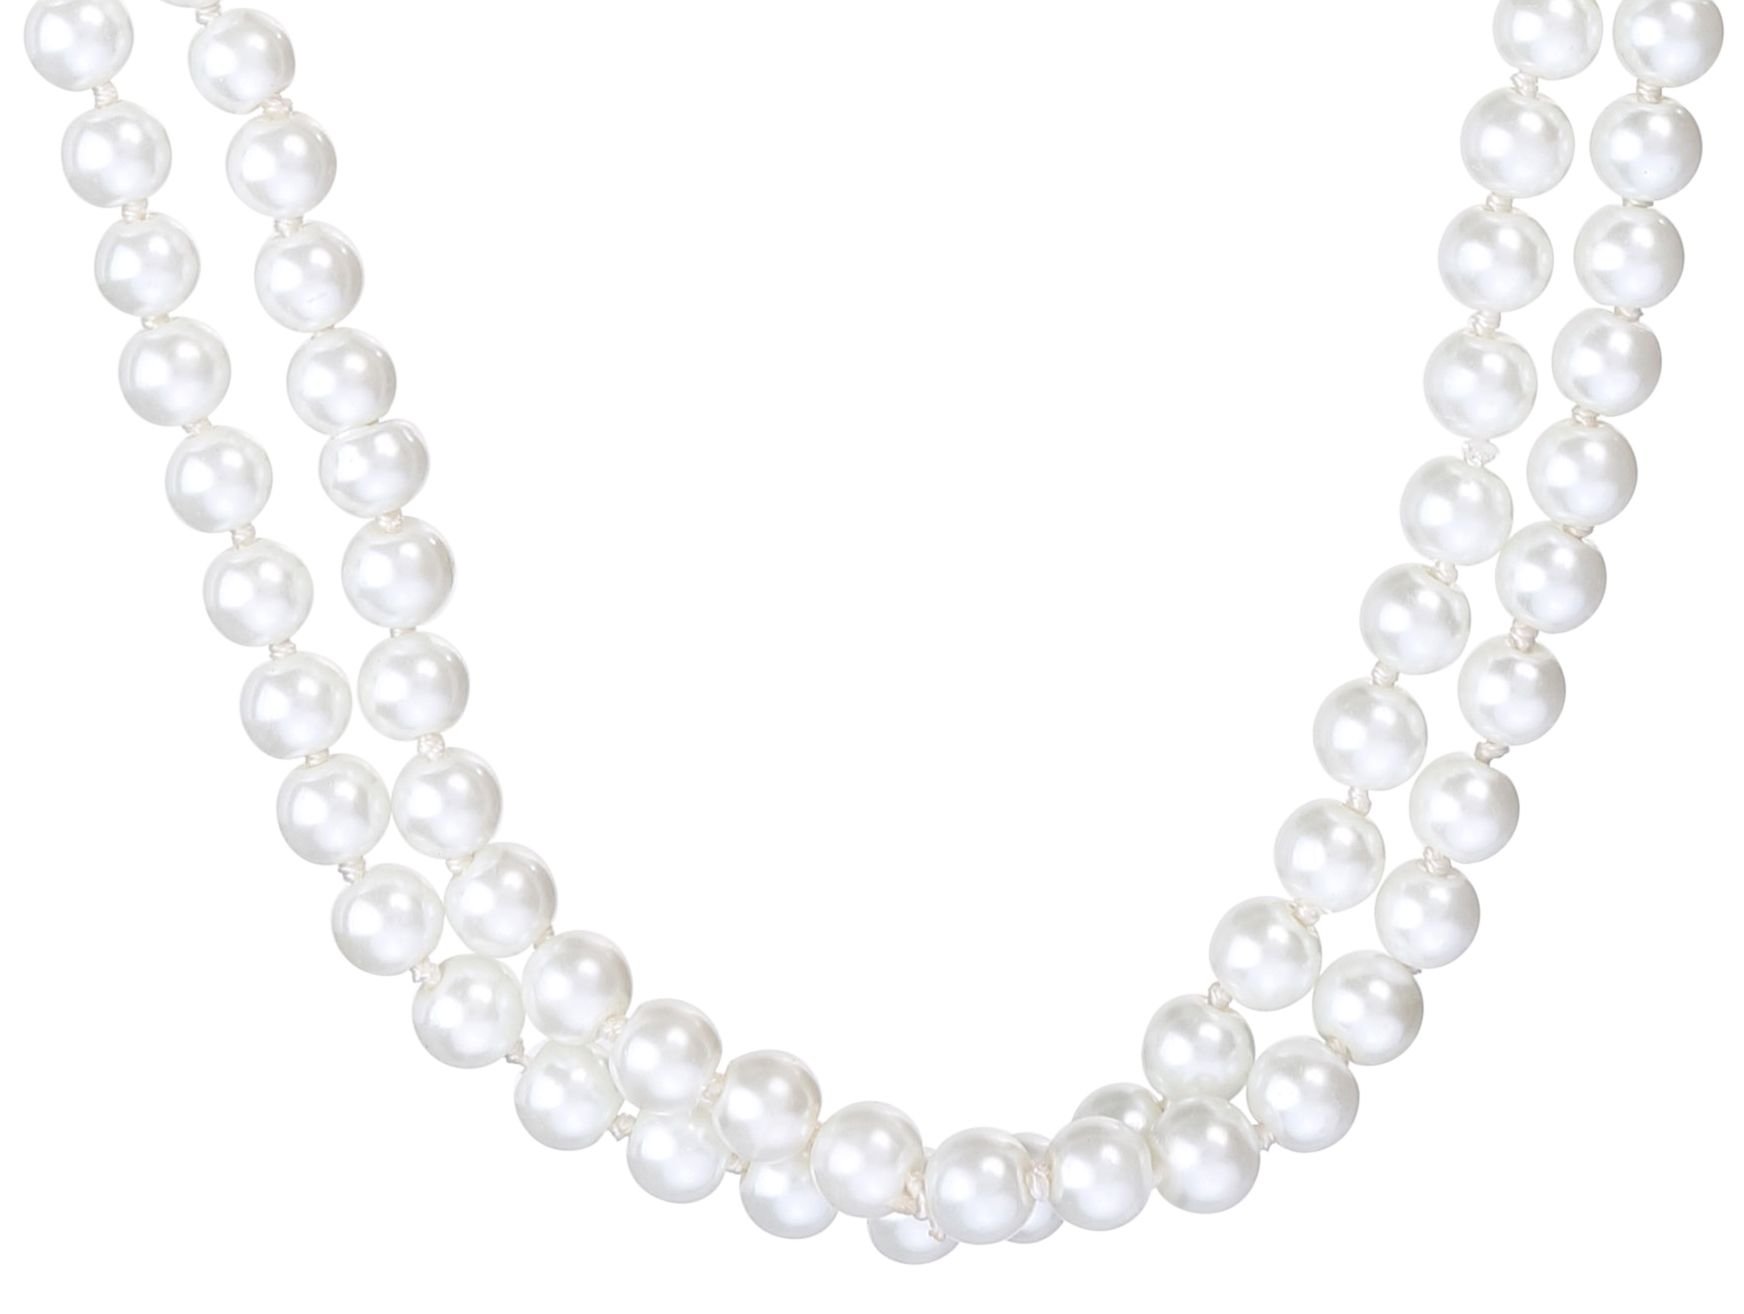 Necklace - Endless Pearls